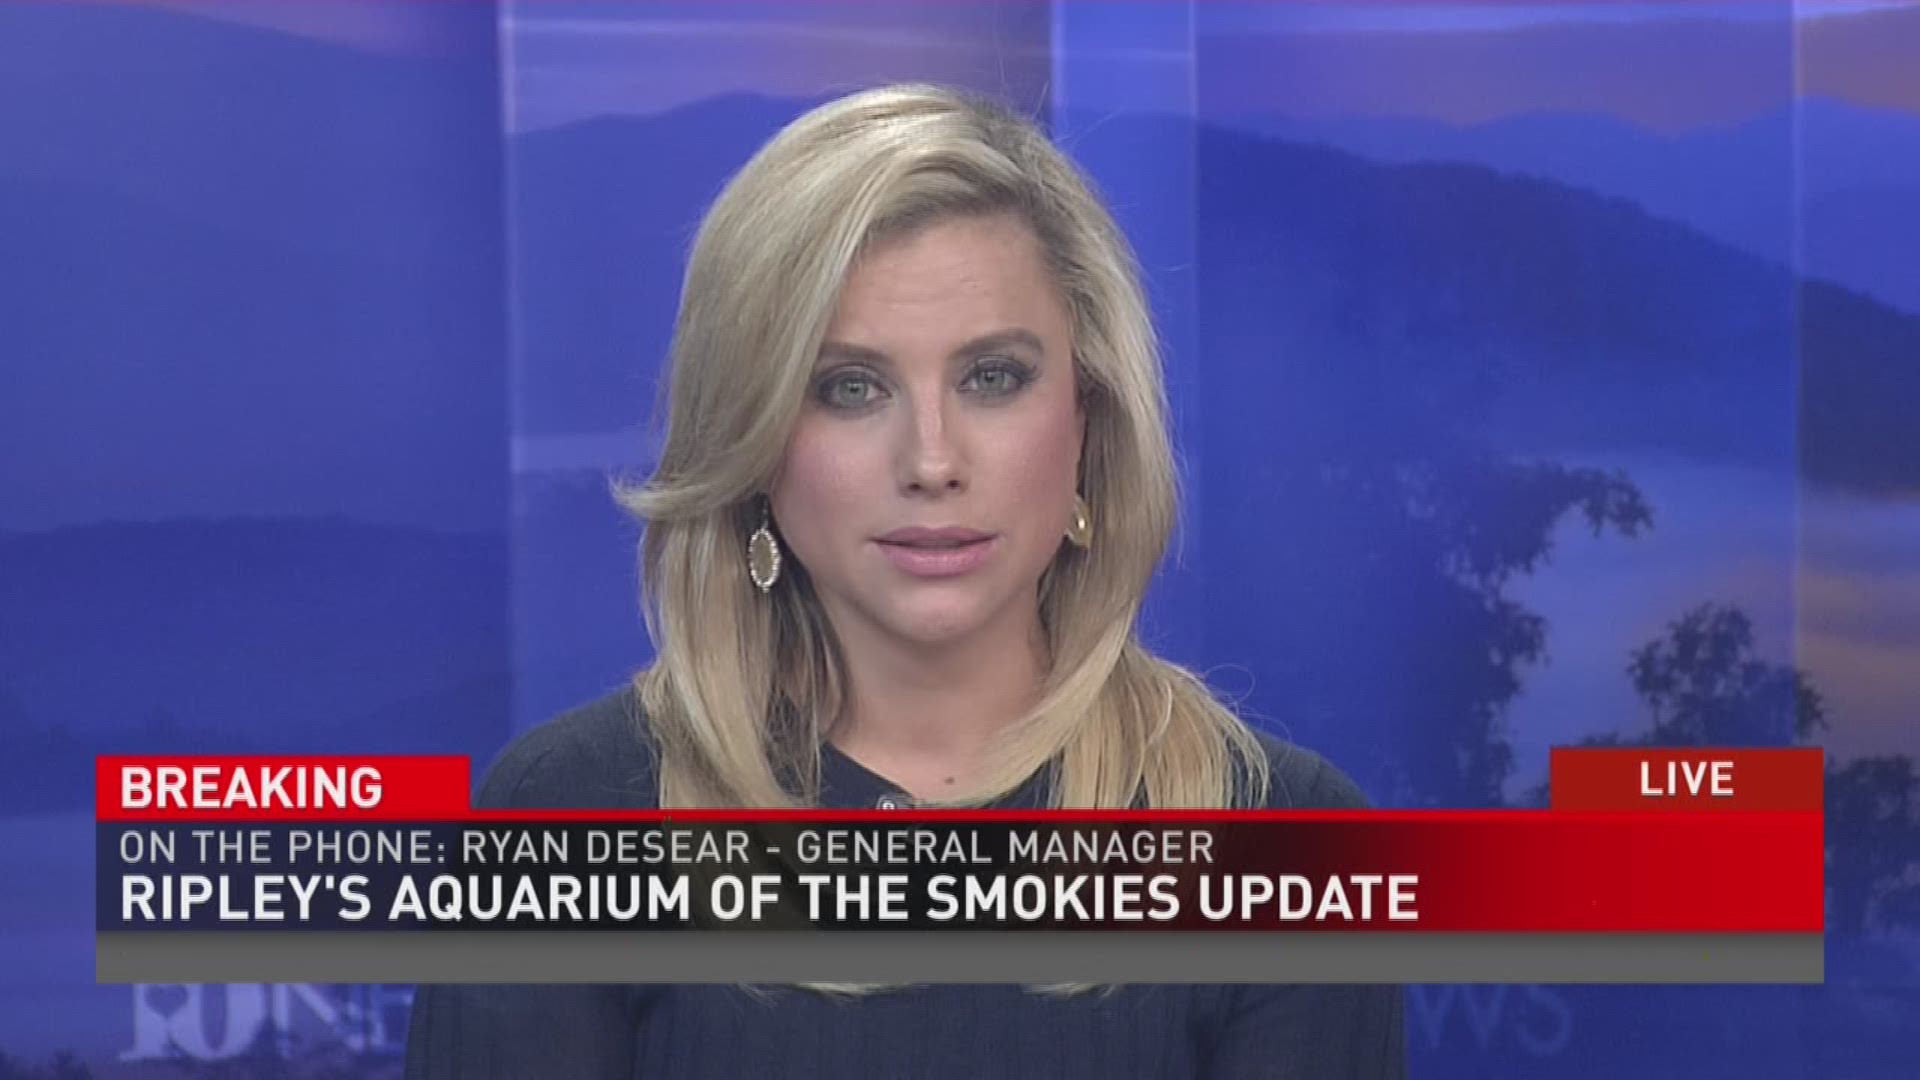 The general manager of Ripley's Aquarium of the Smokies offered an update at 3 p.m. on Nov. 29, 2016.